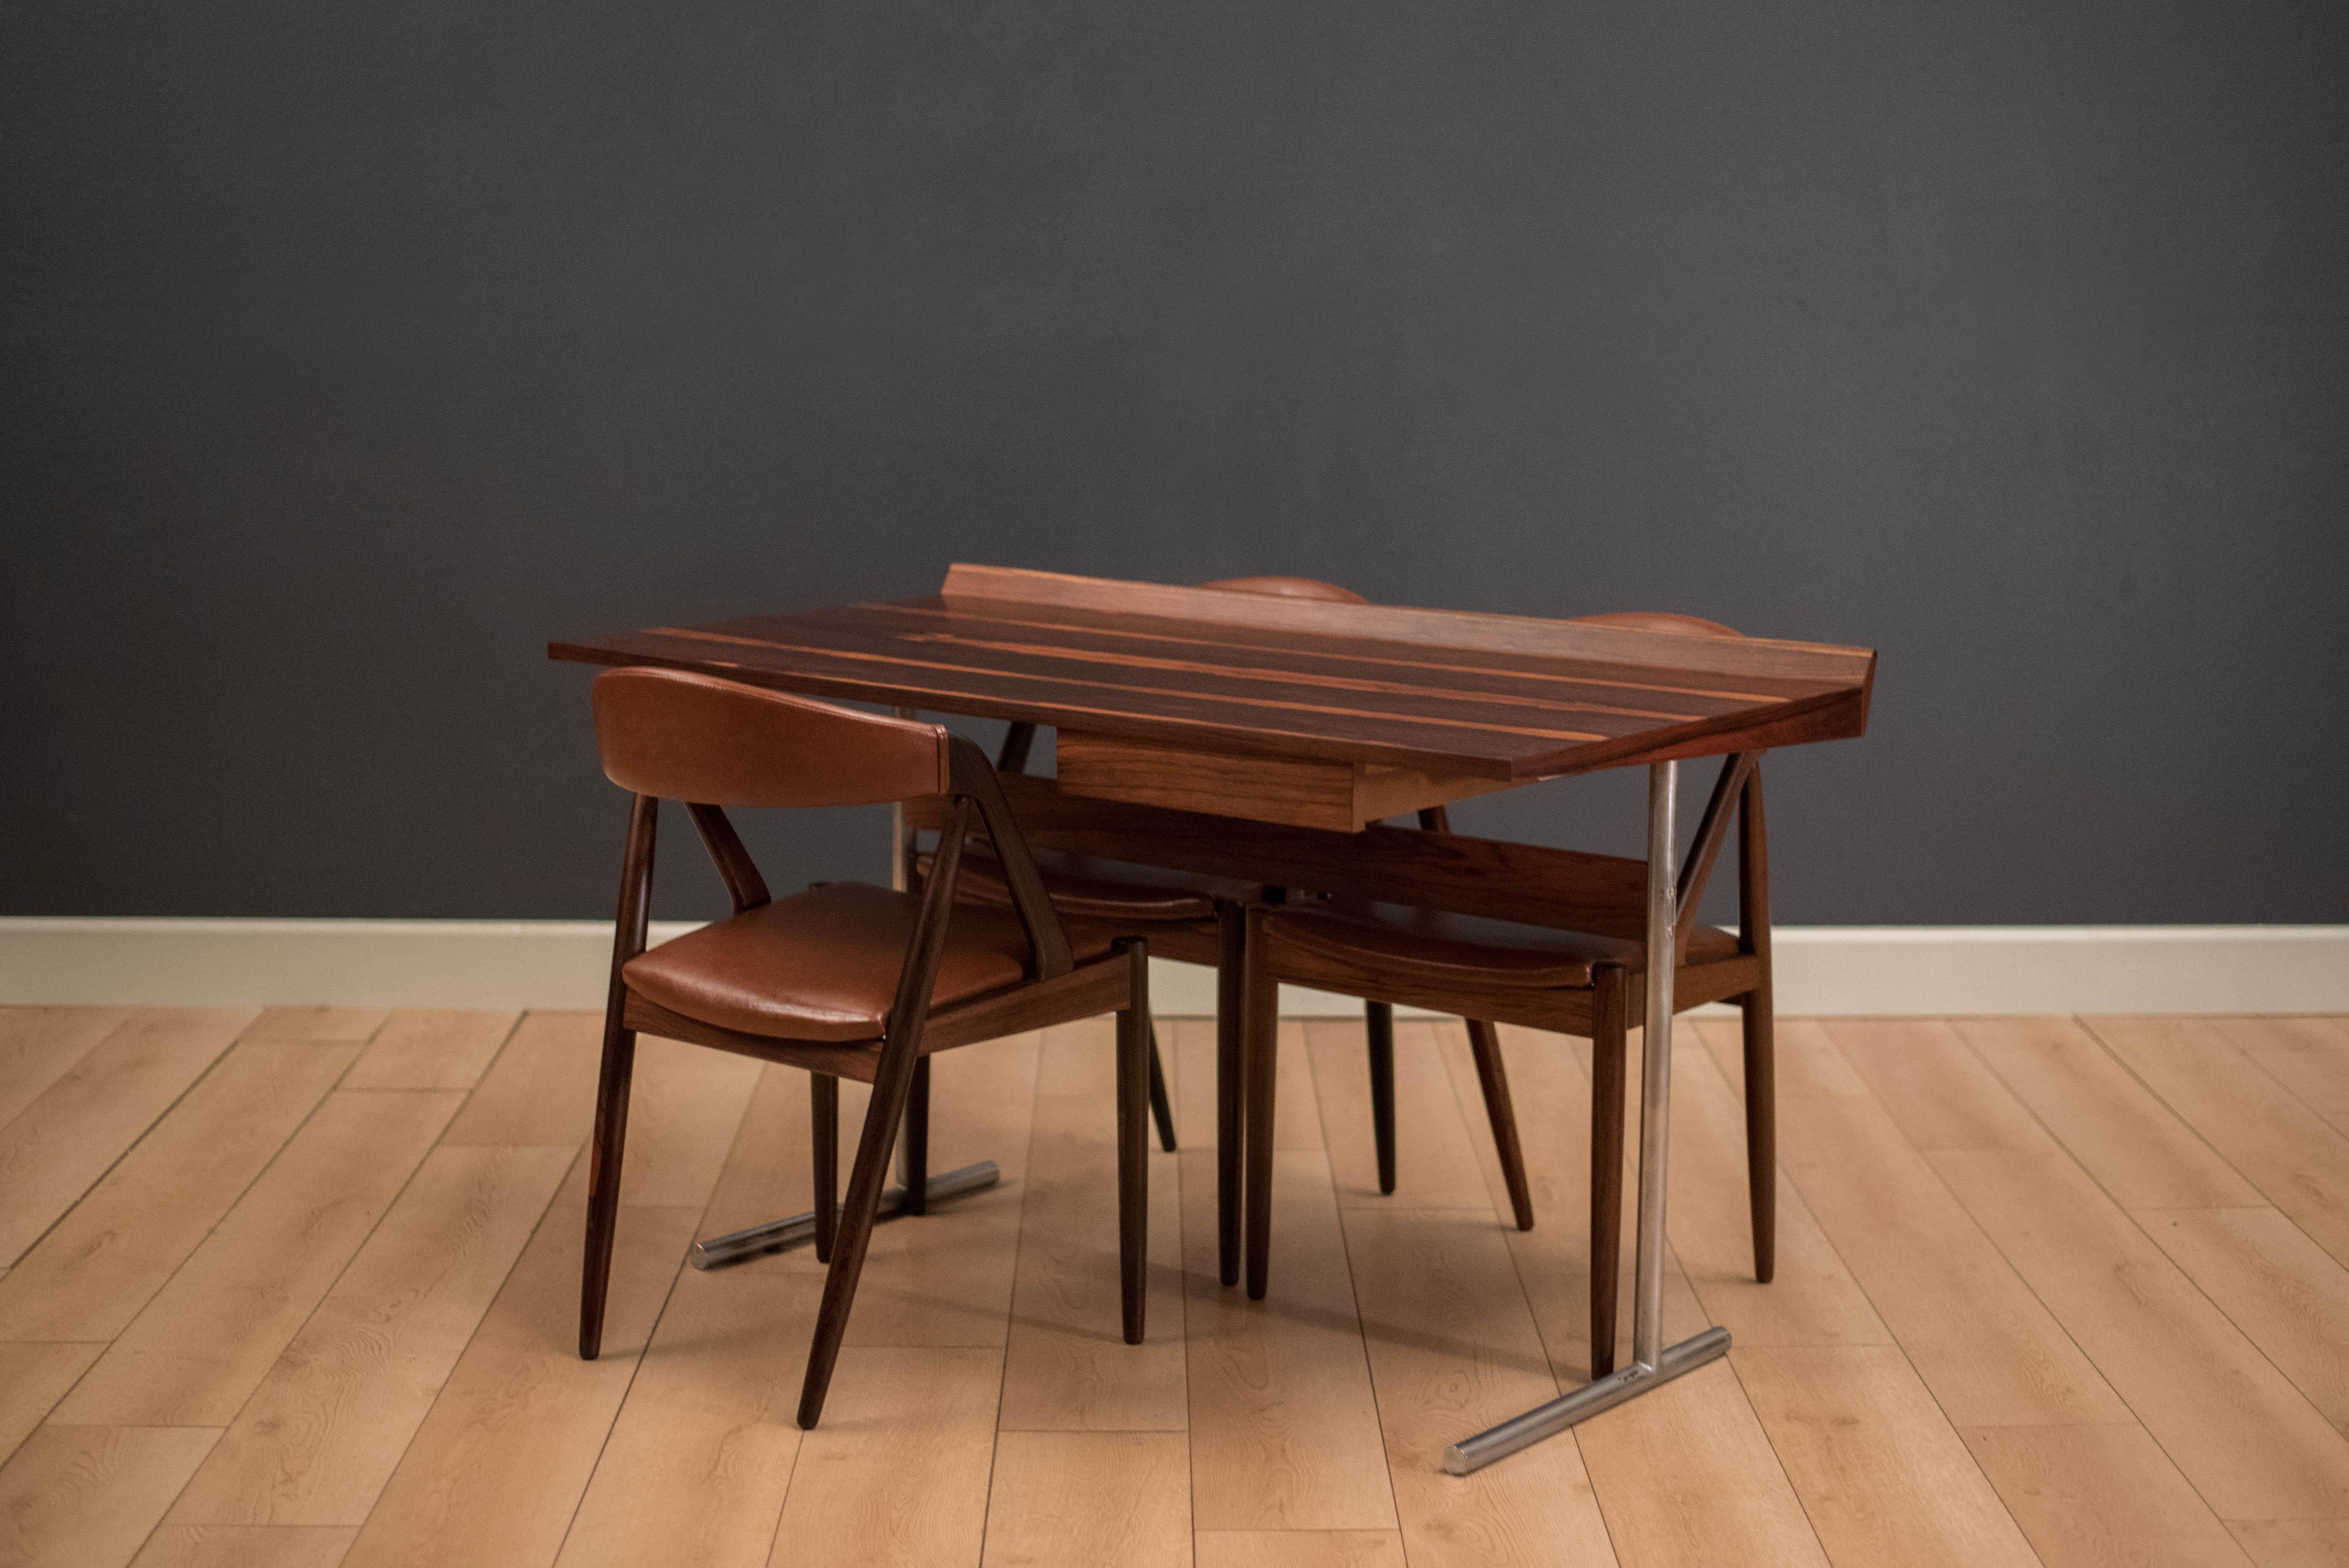 Vintage rosewood writing desk made in Western Germany. This piece features a raised edge table top and includes one storage drawer. Writing top is supported by an industrial style tubular chrome base.